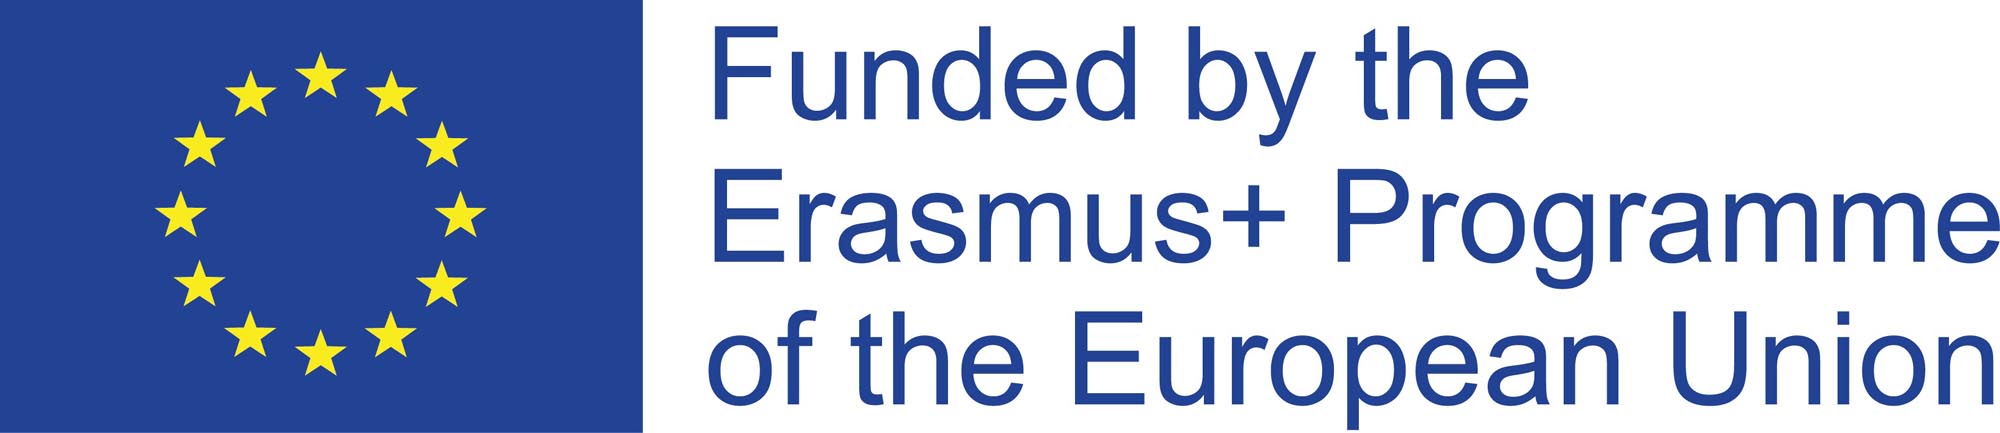 Logo EU Flag with Funded by Erasmus